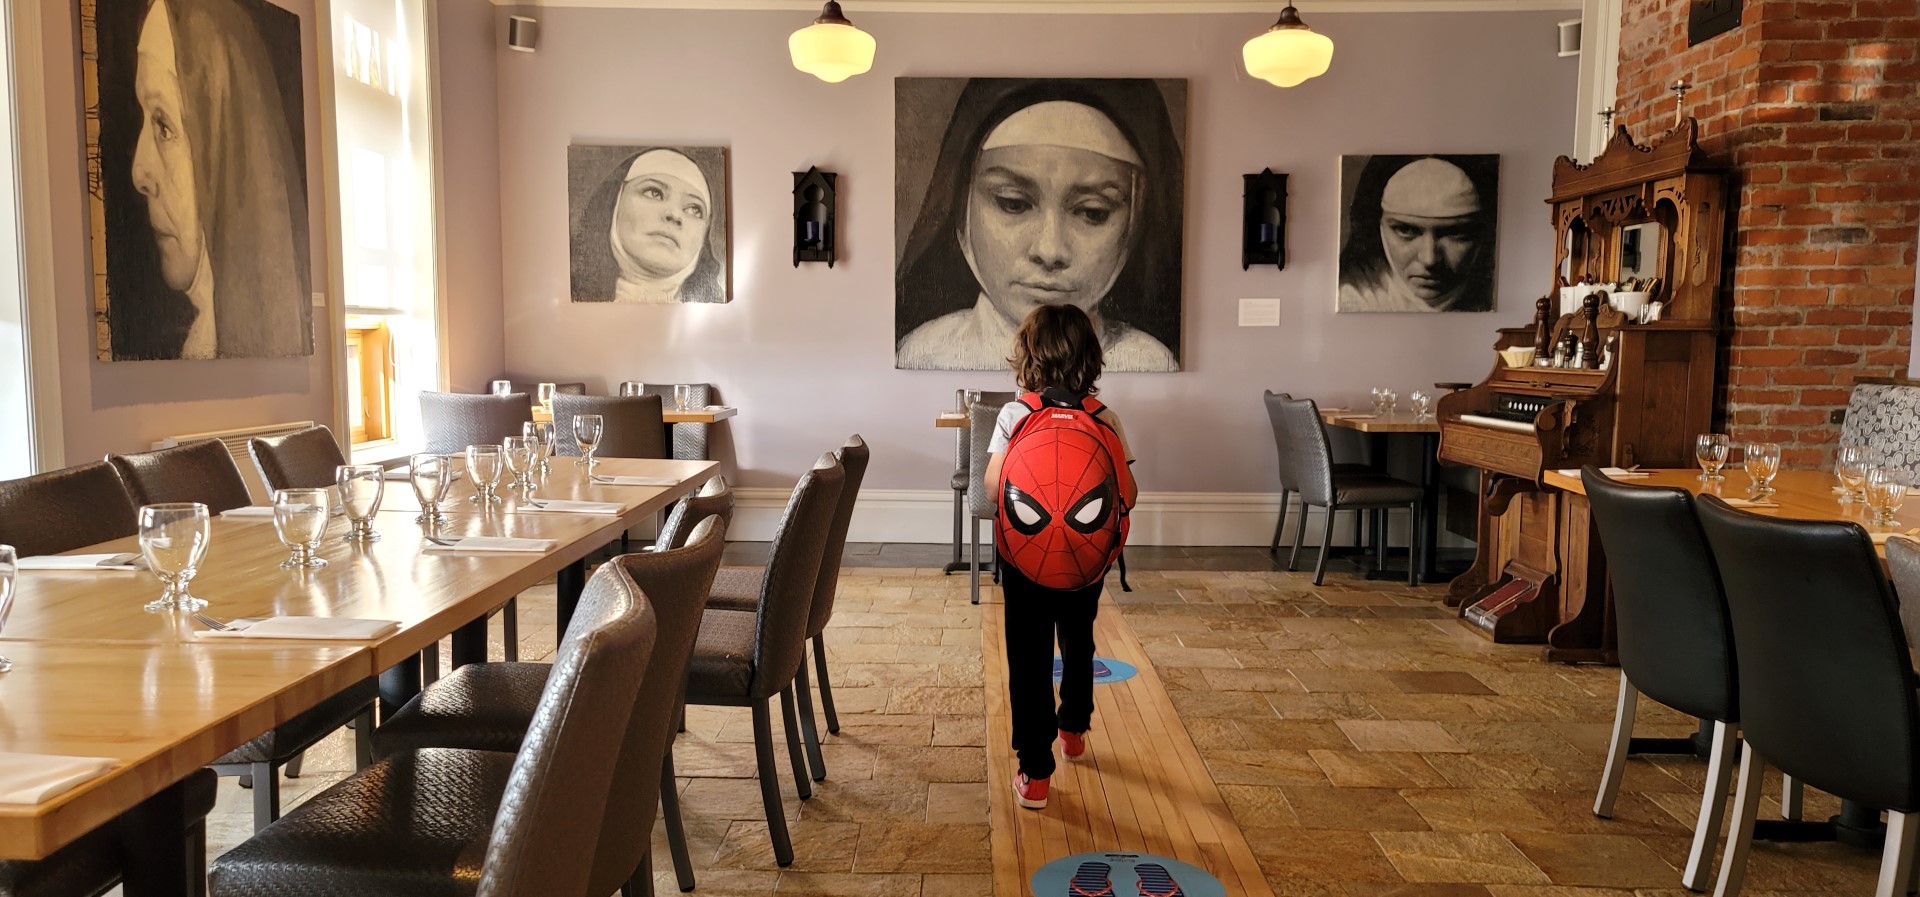 boy with spiderman backpack looking at nun painting